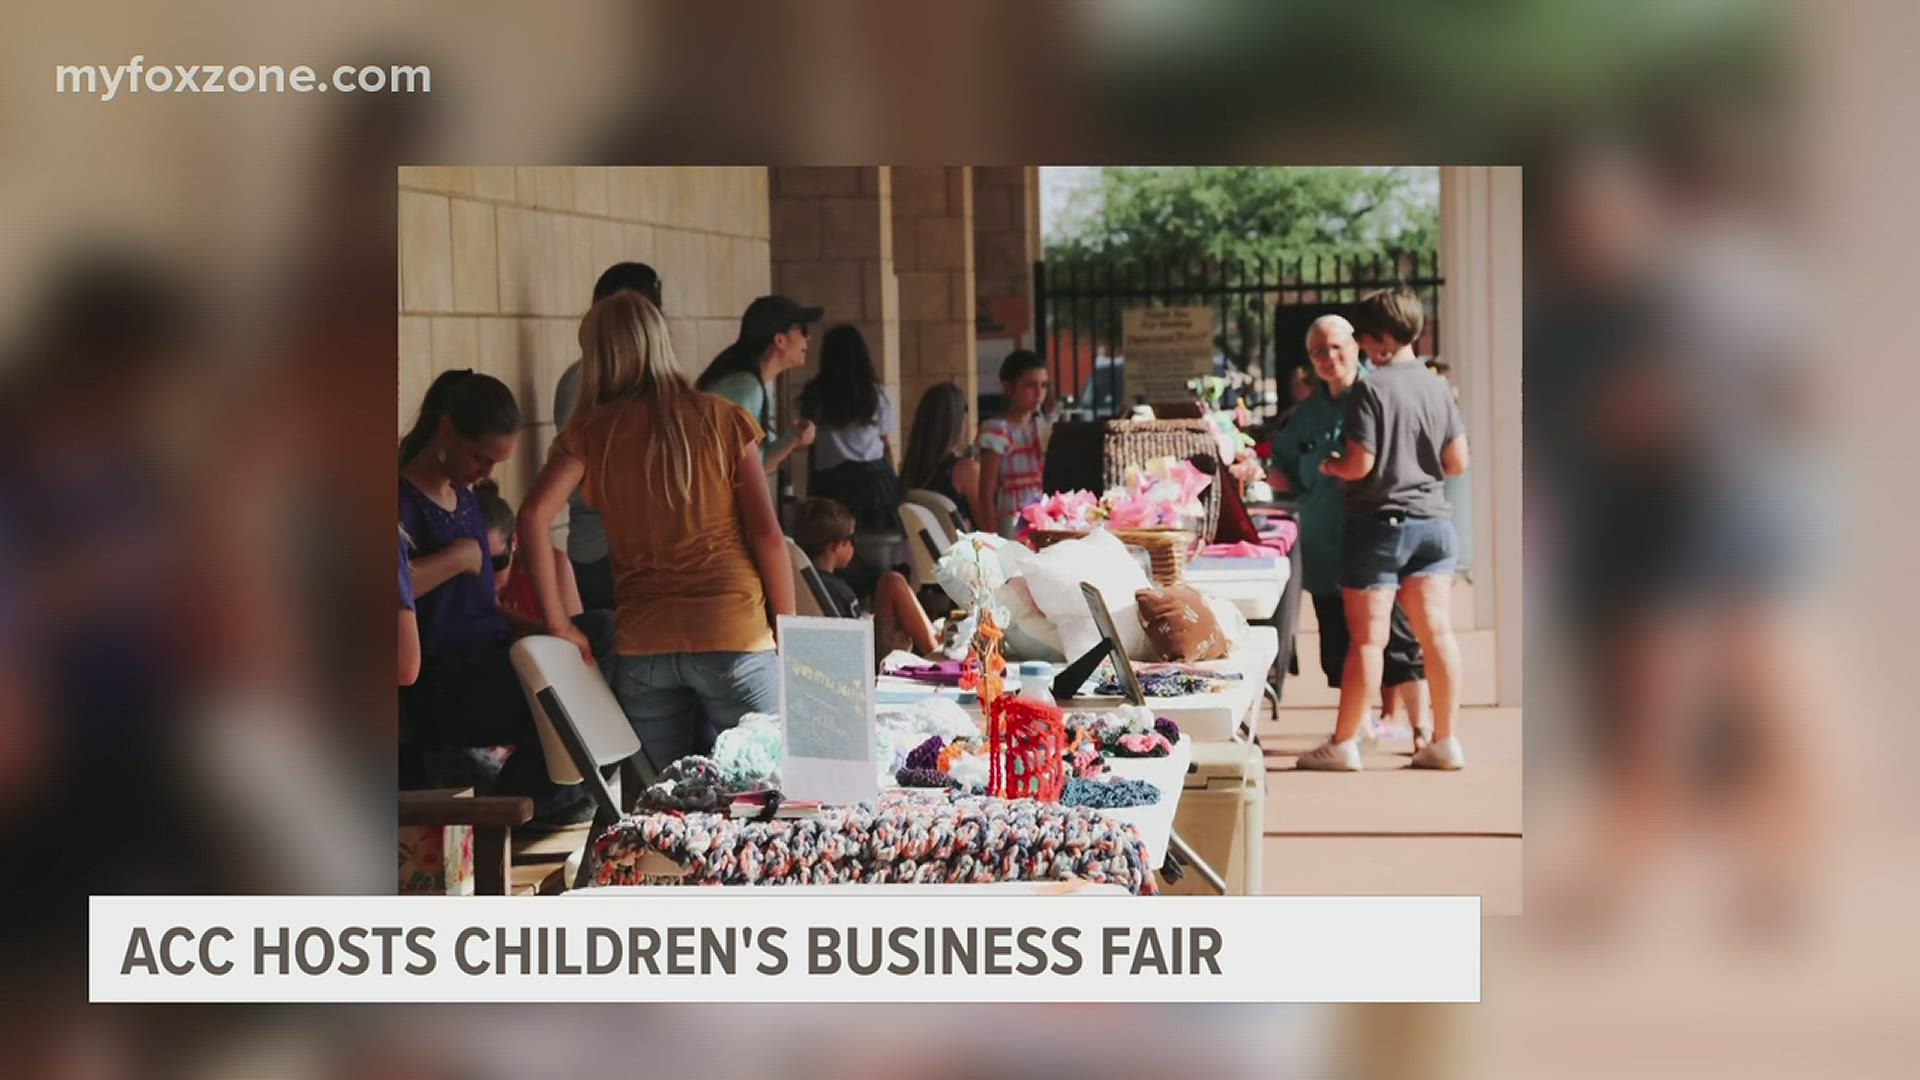 The Abilene Chamber of Commerce is hosting the annual Children's Business Fair from 11 a.m. to 1 p.m. July 29 at the Mall of Abilene, 4310 Buffalo Gap Road.